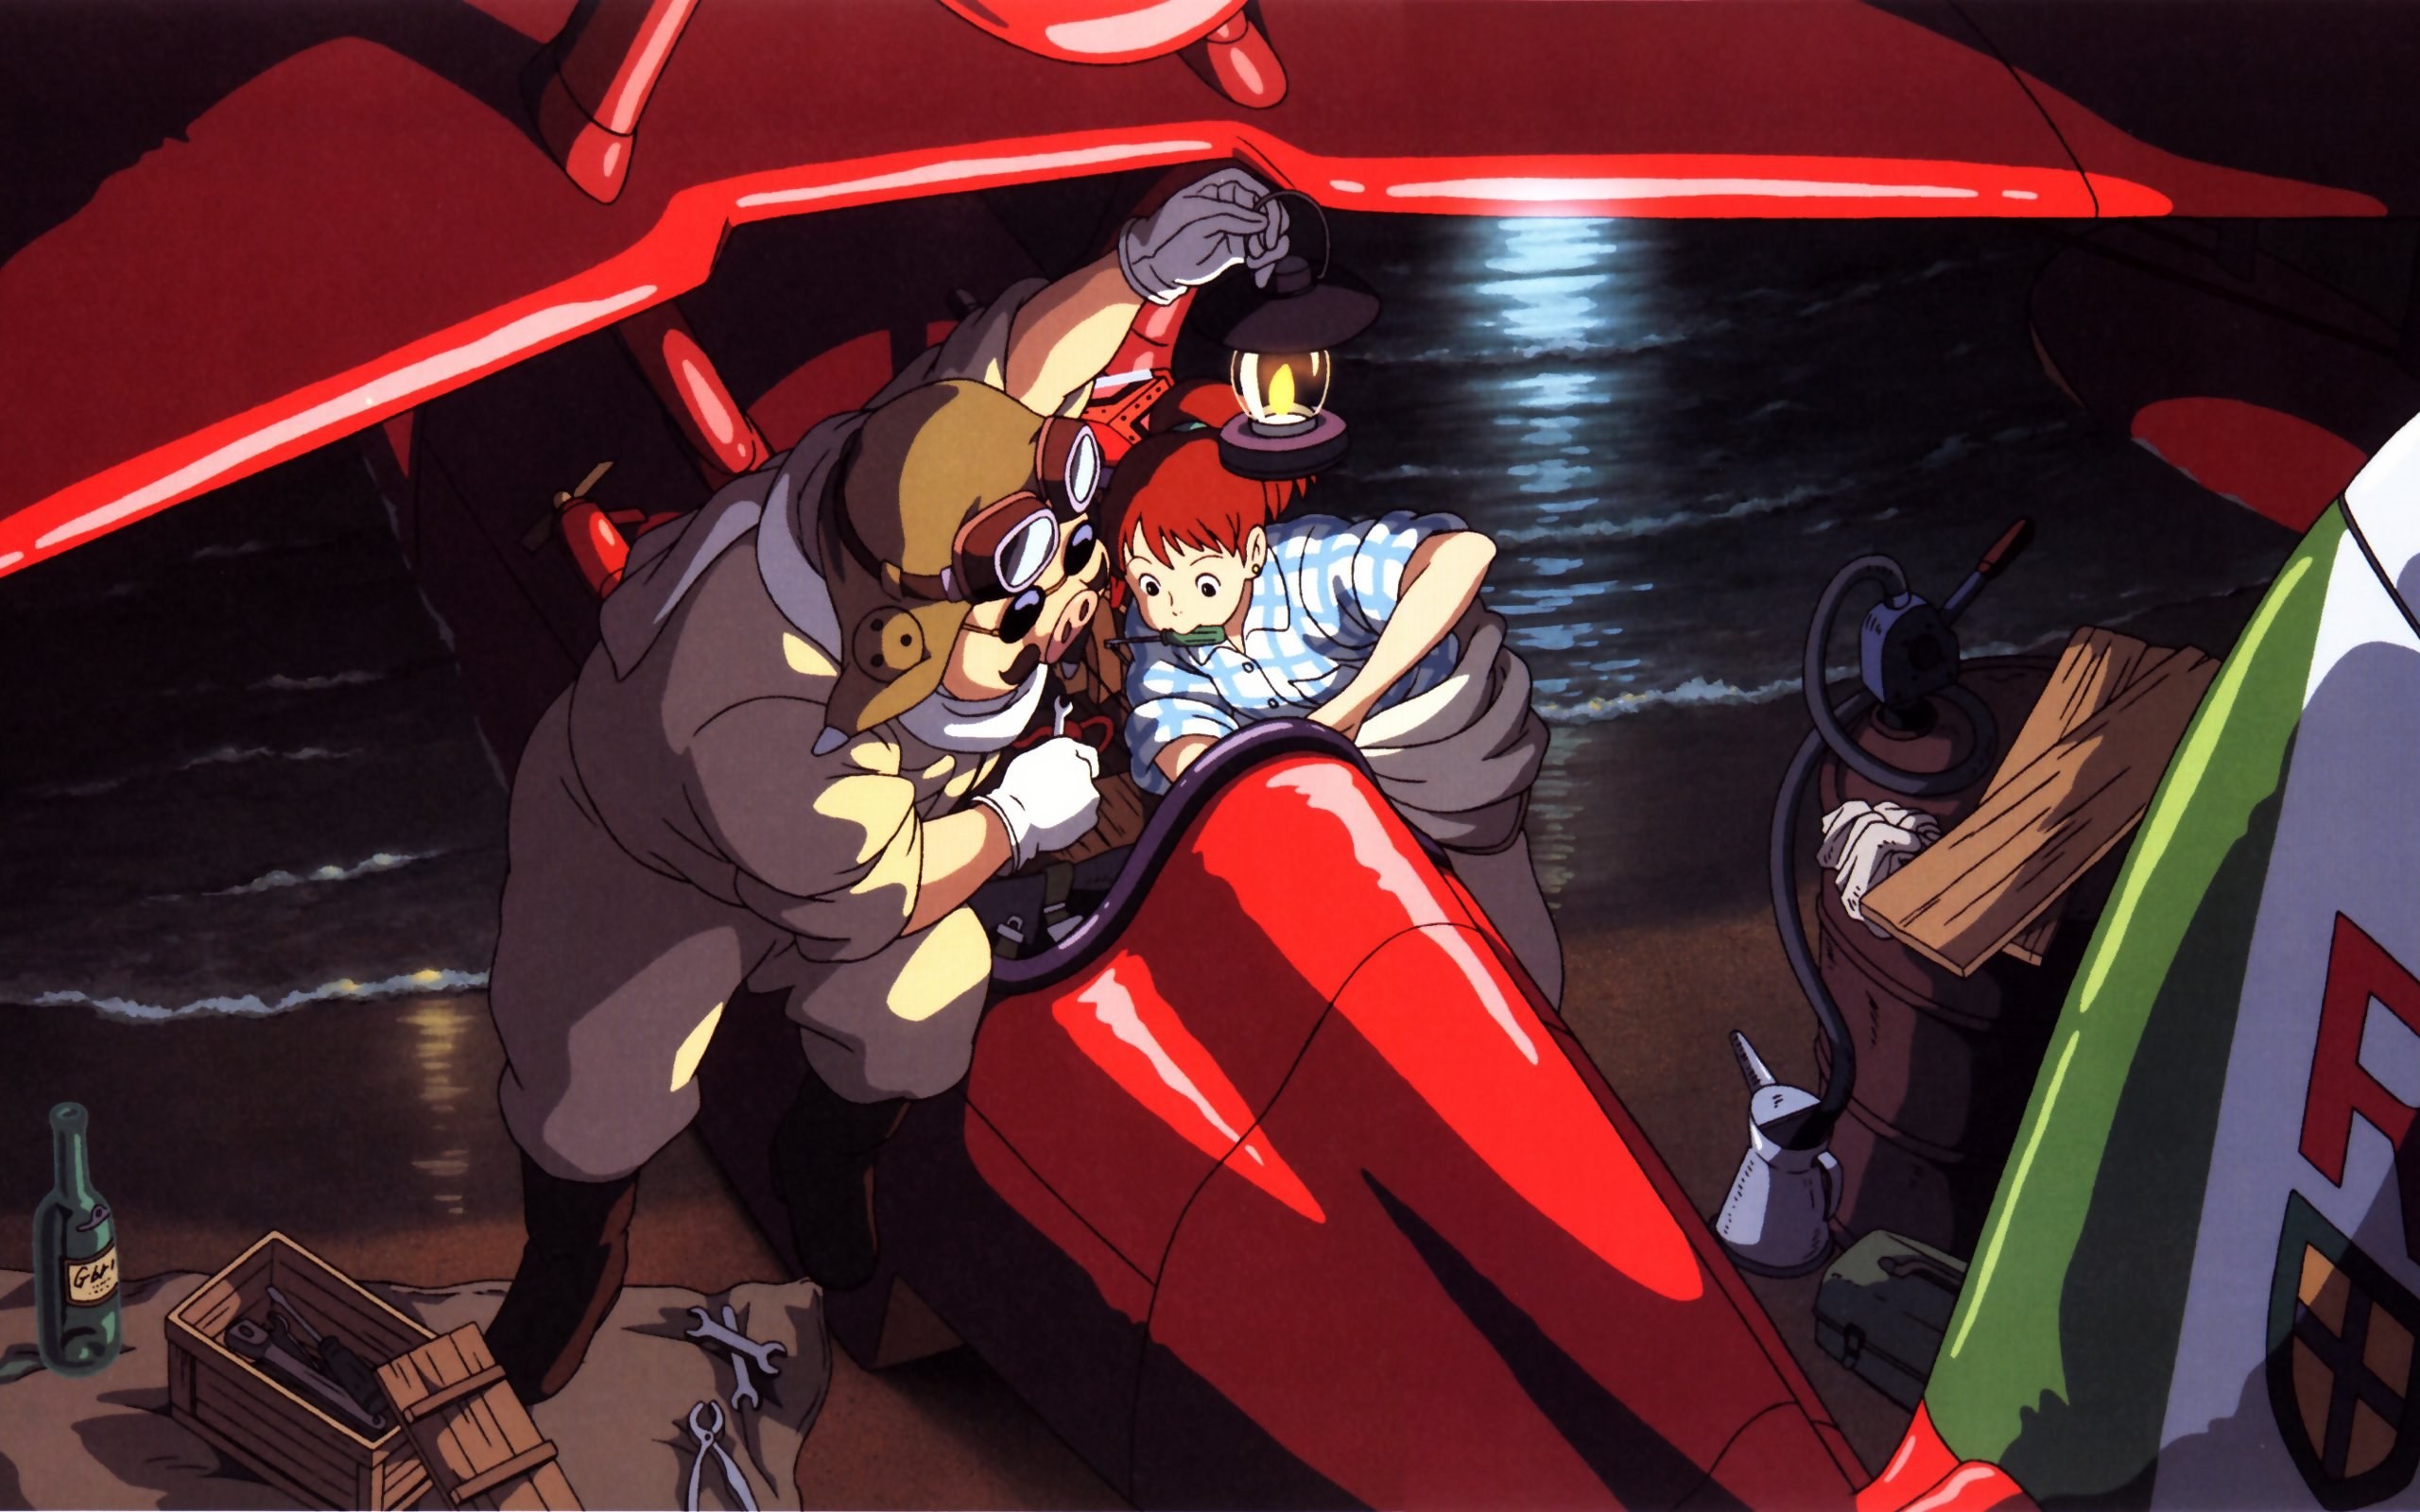 Anime 2560x1600 Porco Rosso Studio Ghibli anime movies aircraft anime girls wrench bottles tools screwdriver redhead